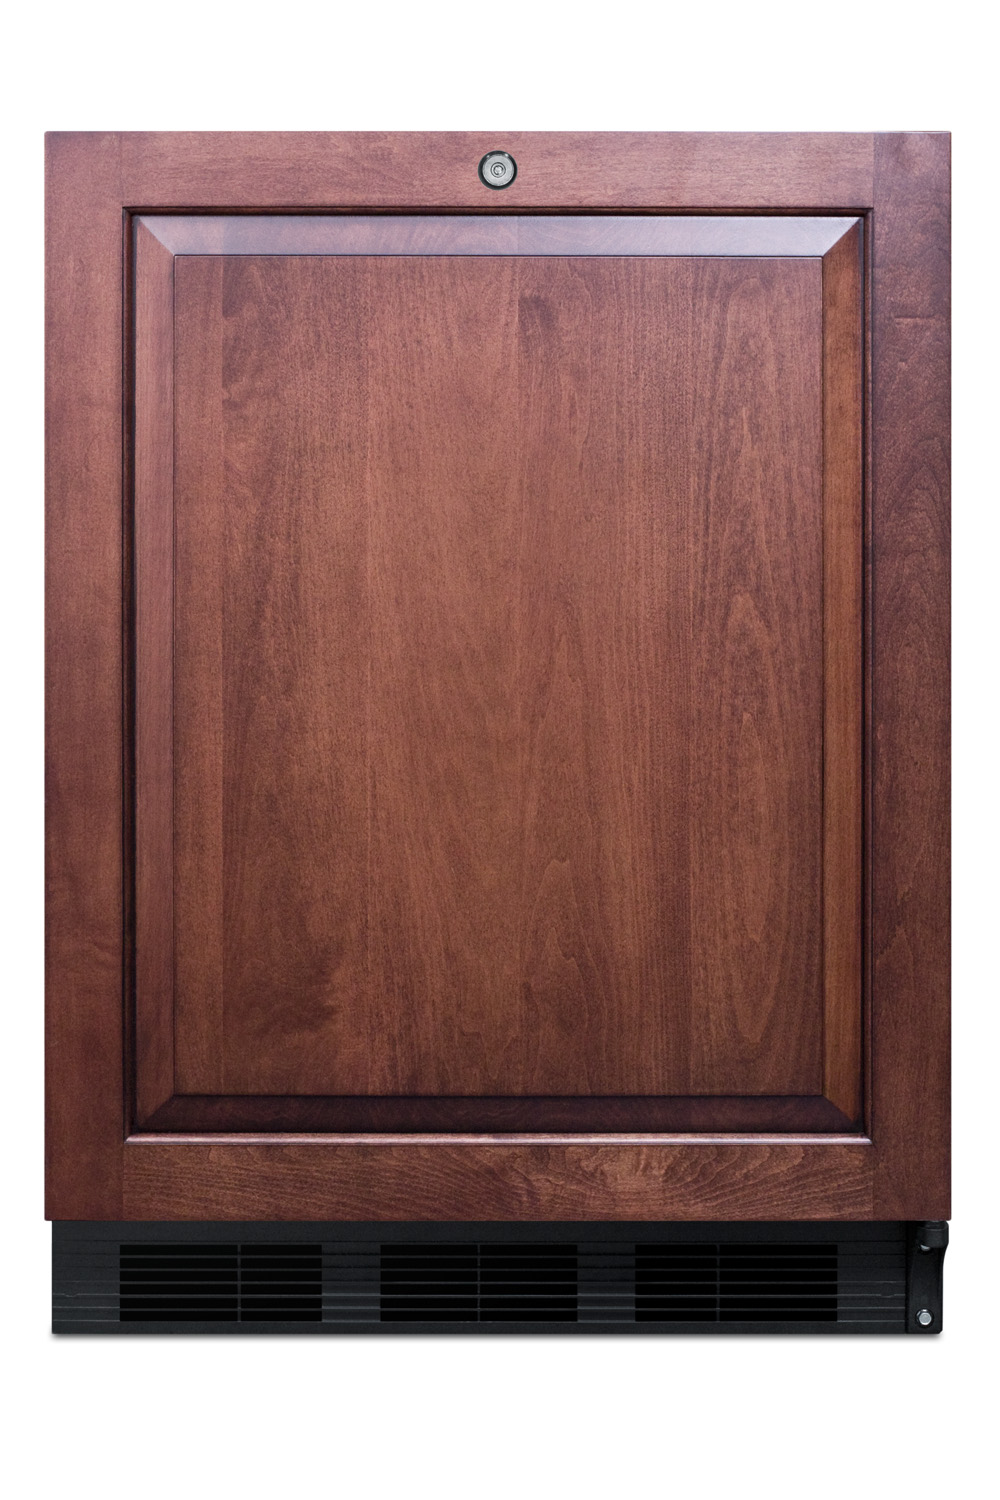 Summit 24" Wide Built-In All-Refrigerator, ADA Compliant (Panel Not Included)